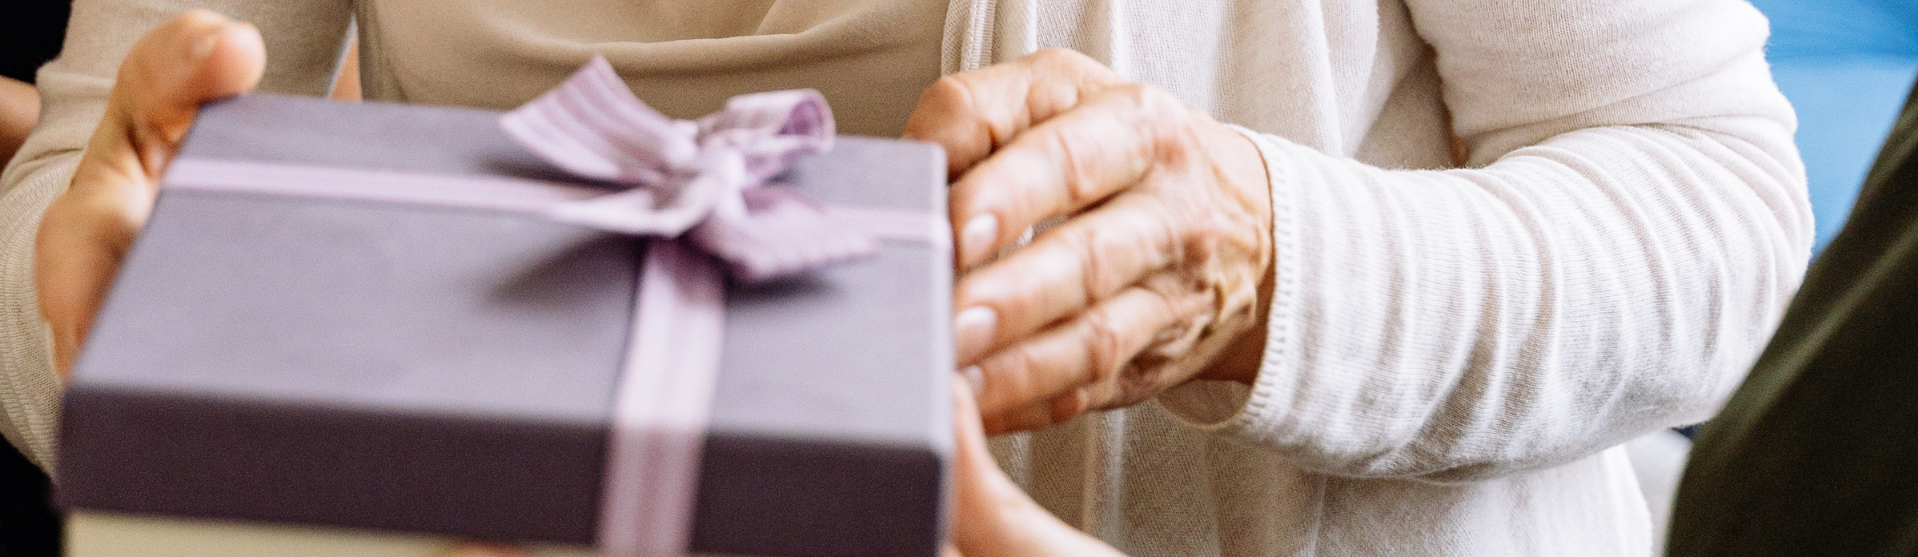 Woman holding a gift box